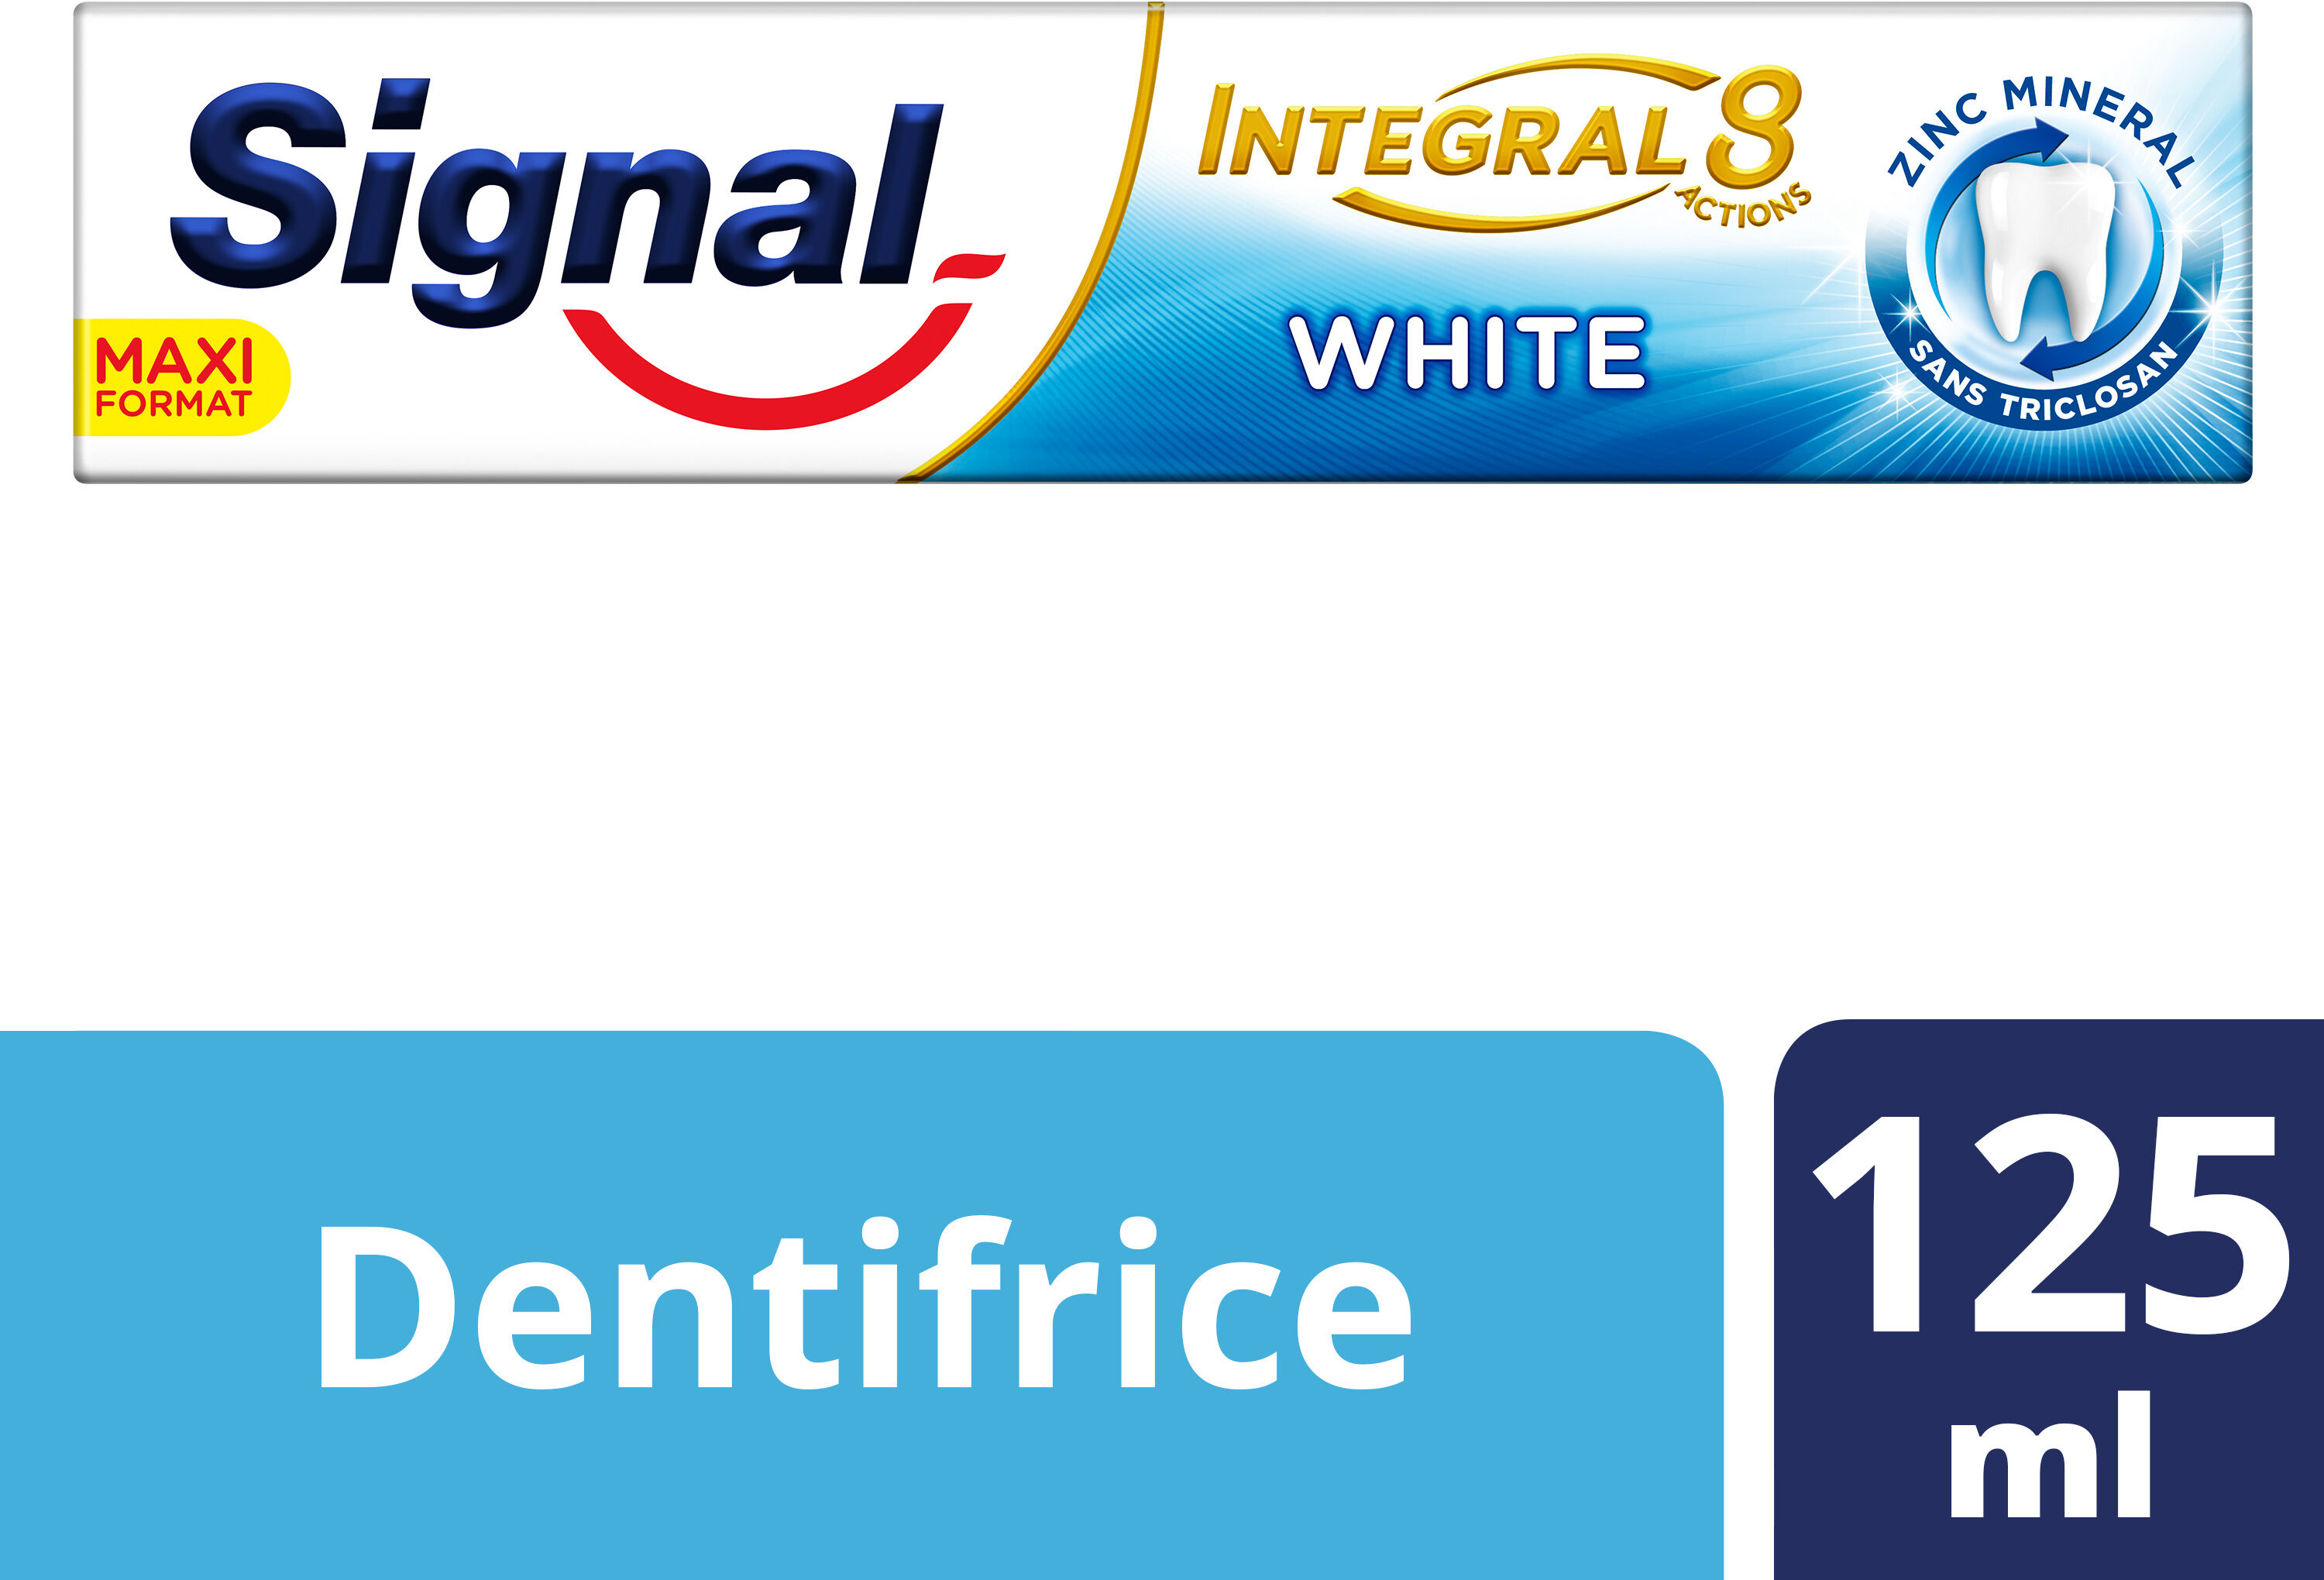 Signal Dentifrice Integral 8 White - Product - fr